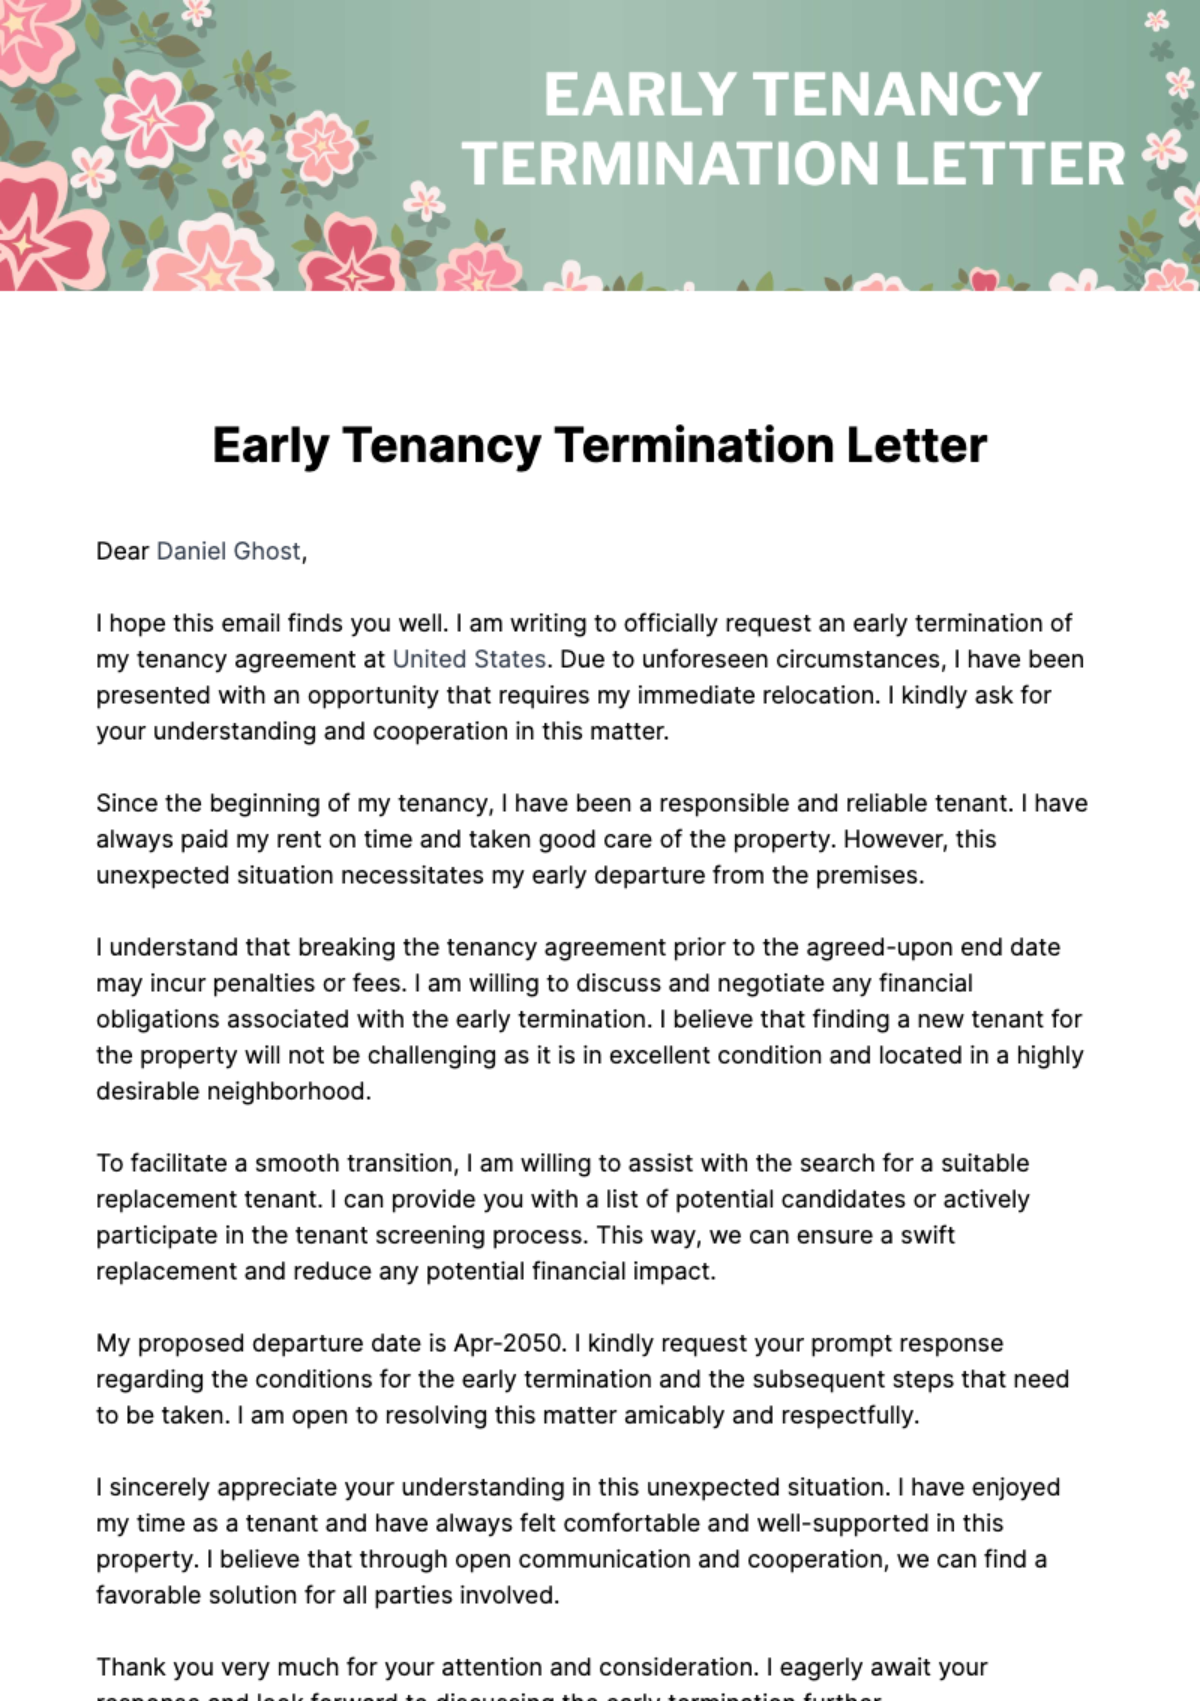 Free Early Tenancy Termination Letter Template